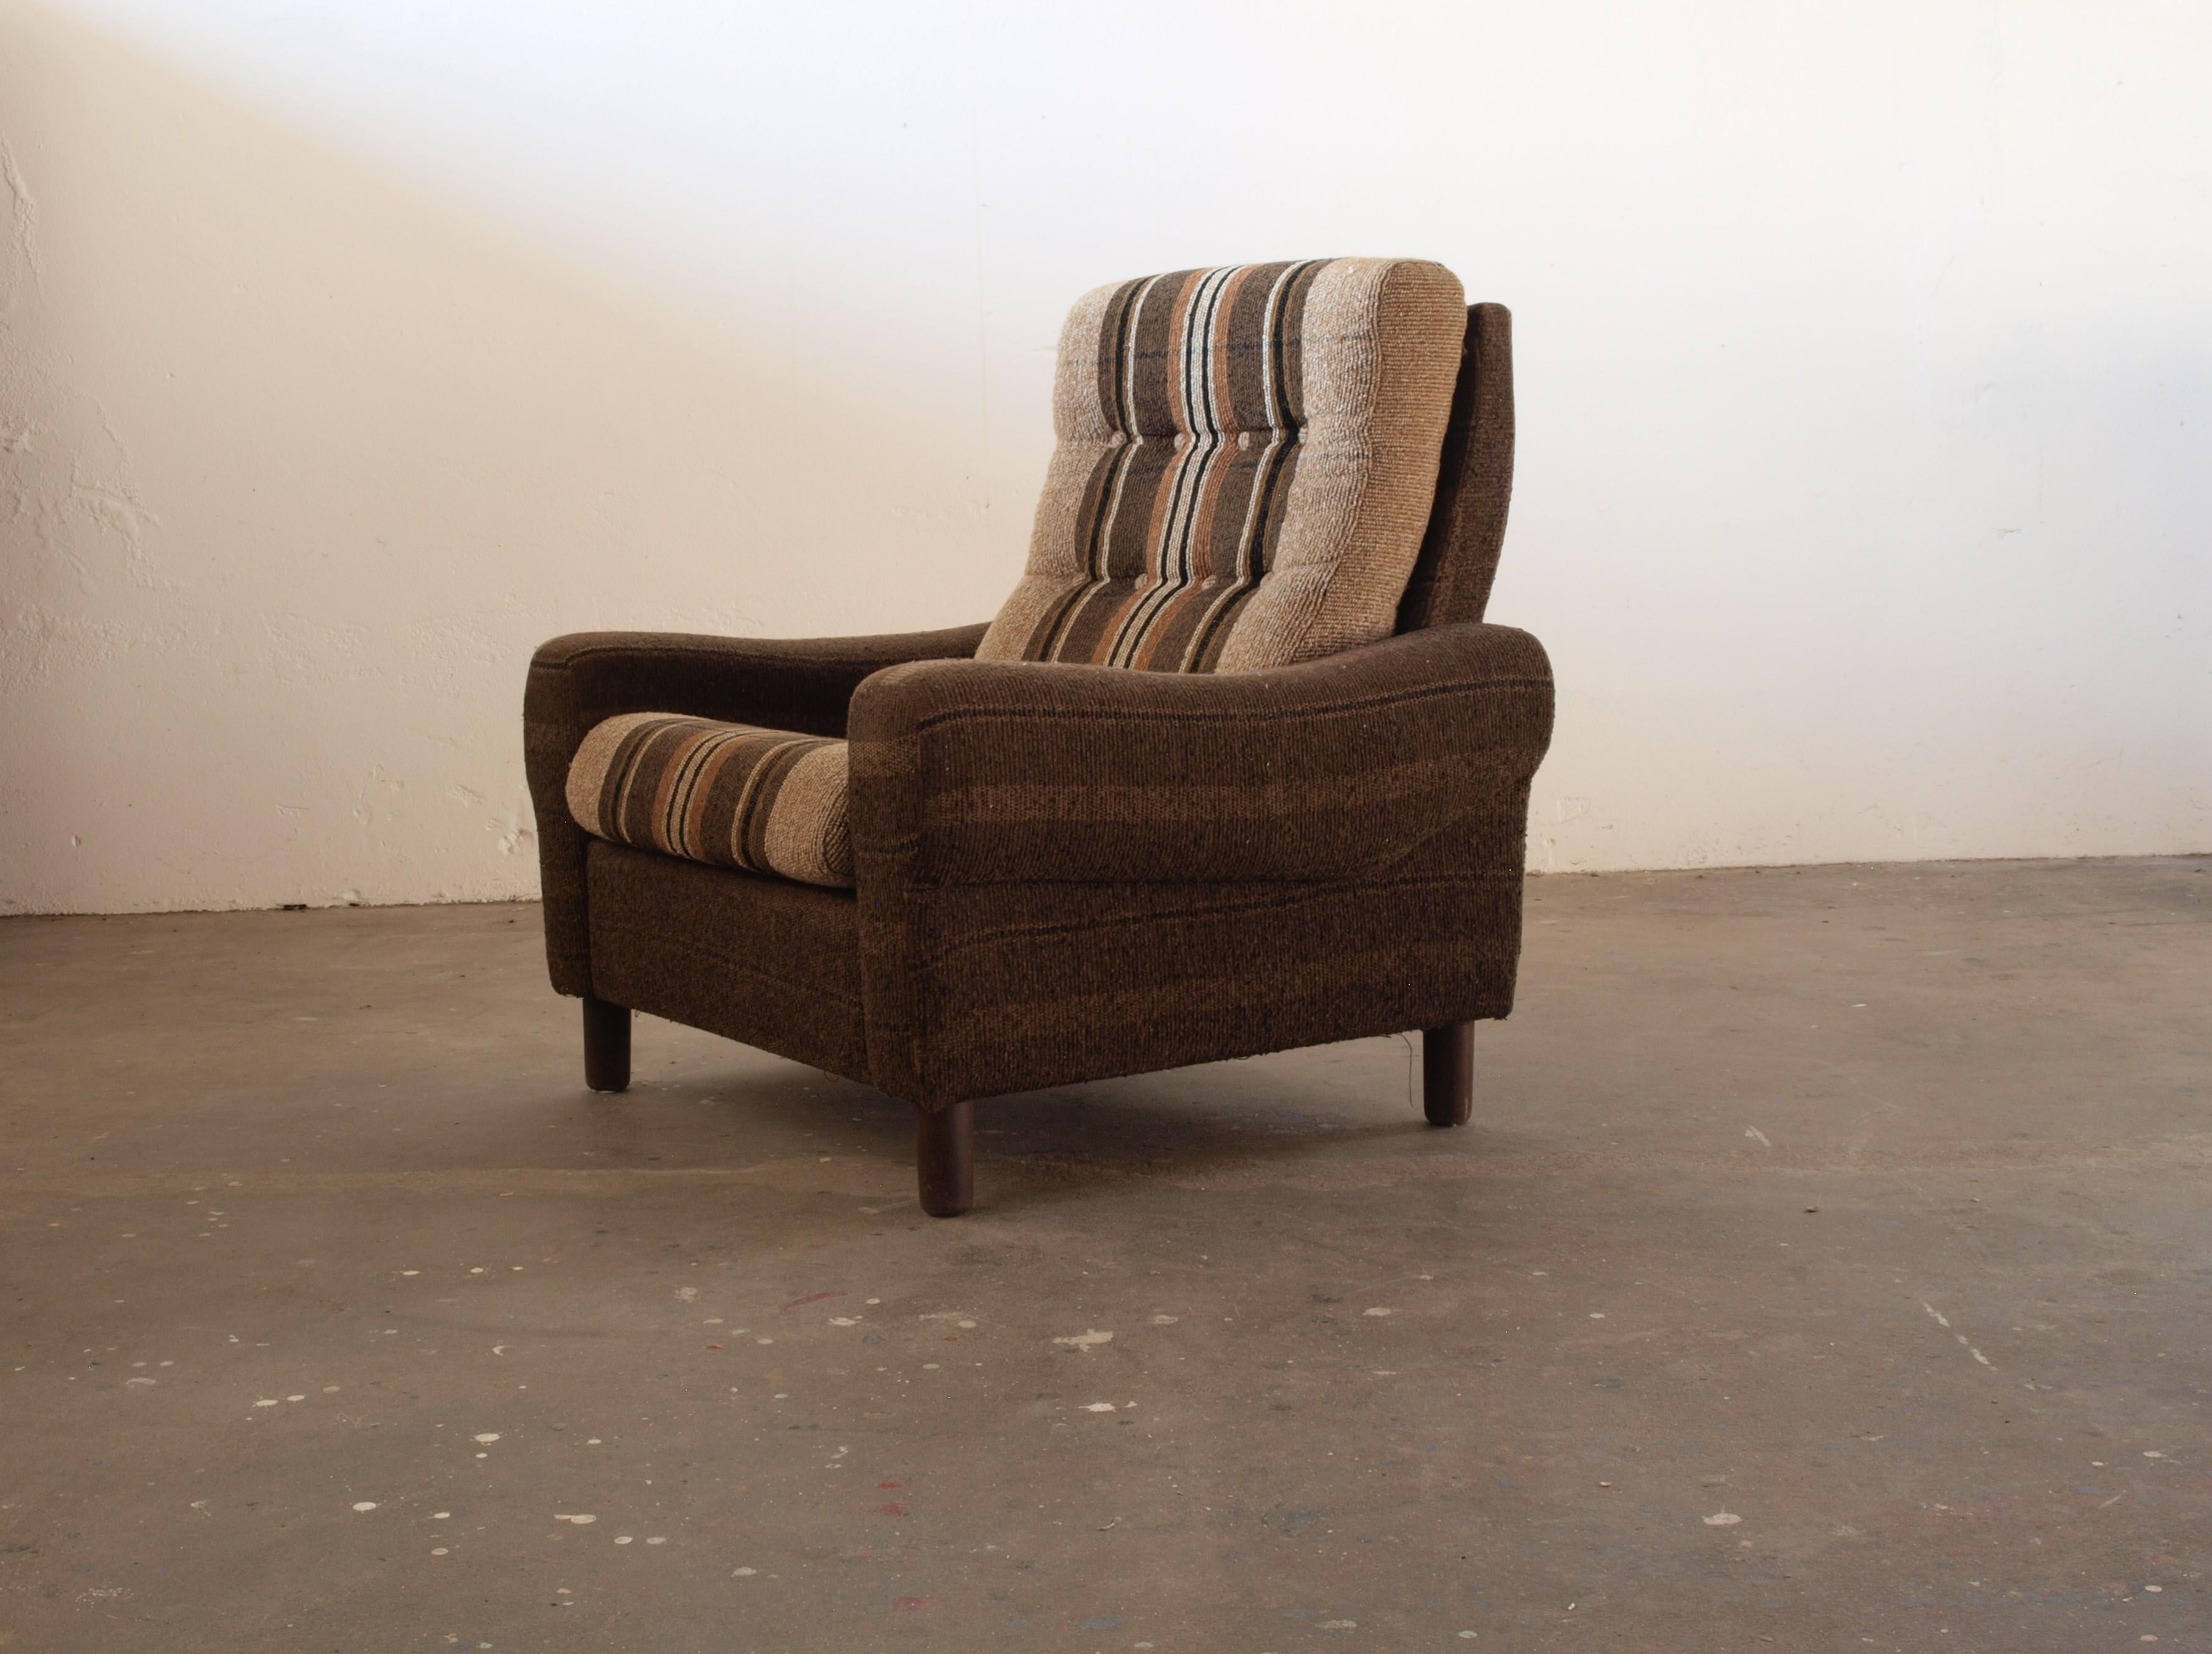 Beautiful little lounge chair from the Danish design period of the 1970s. It is in thick wool, that has a warm in the color.

It is in really good condition, very strong fabric and no holes or damage. Small size that can be fitted in every room and